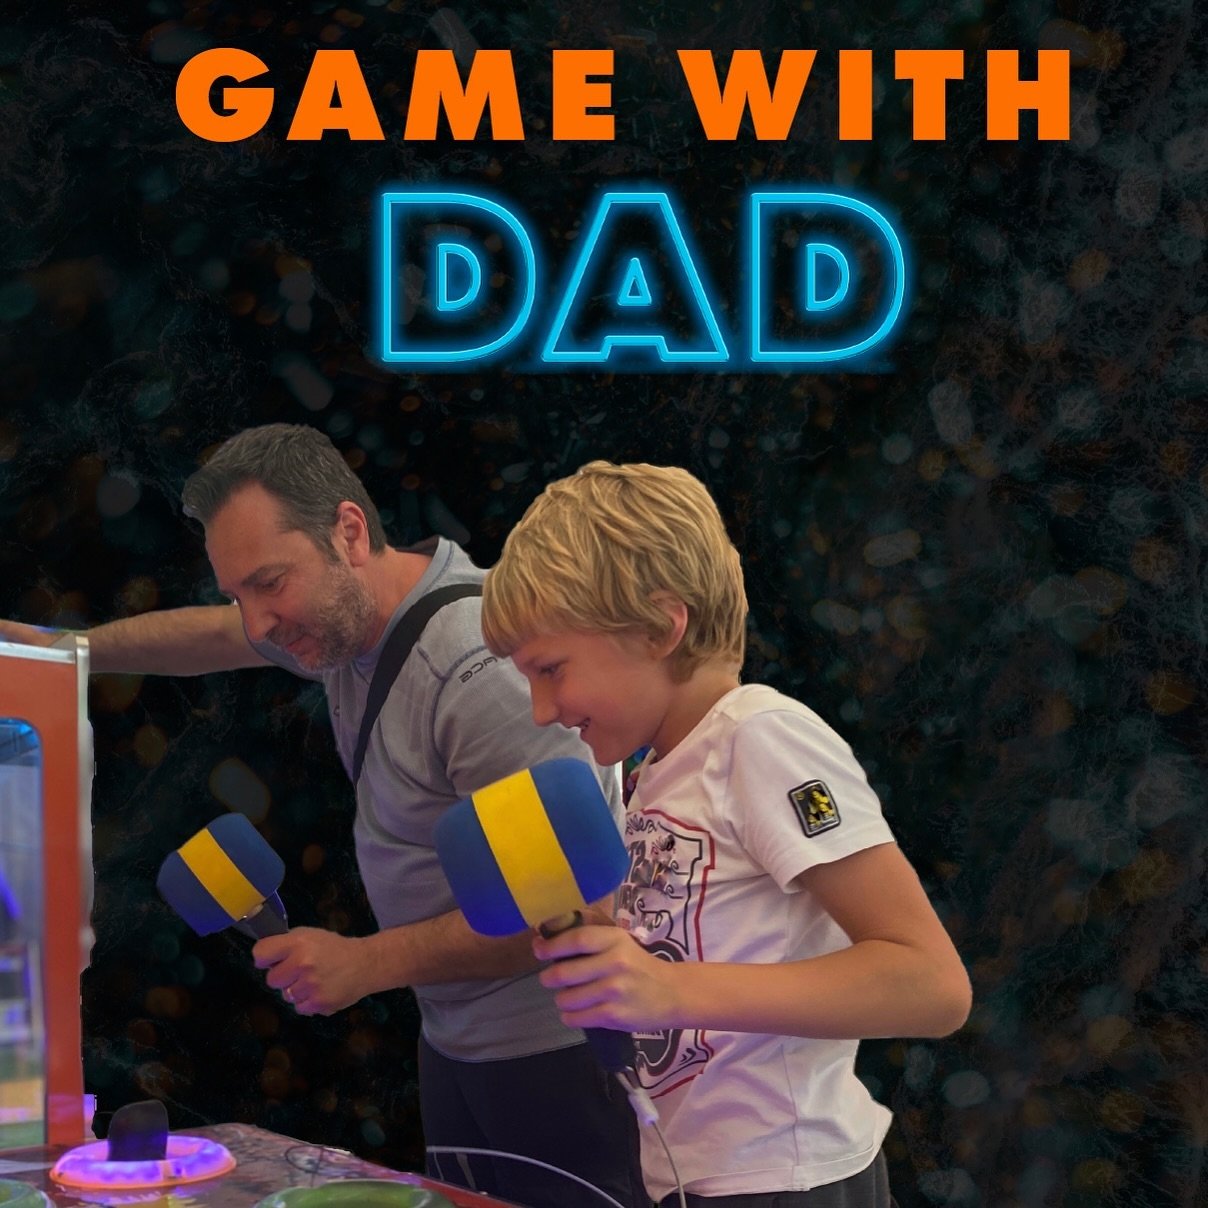 🕹️GAME with DAD!

😝Have a blast gaming with dad in our MASSIVE arcade! Get 2,000 arcade points as part of our &ldquo;Fun with Dad&rdquo; package!

🎟️Get your VIP pass at ArnoldsFFC.com for a great deal of just $29 and get

1 Ropes Course Expeditio